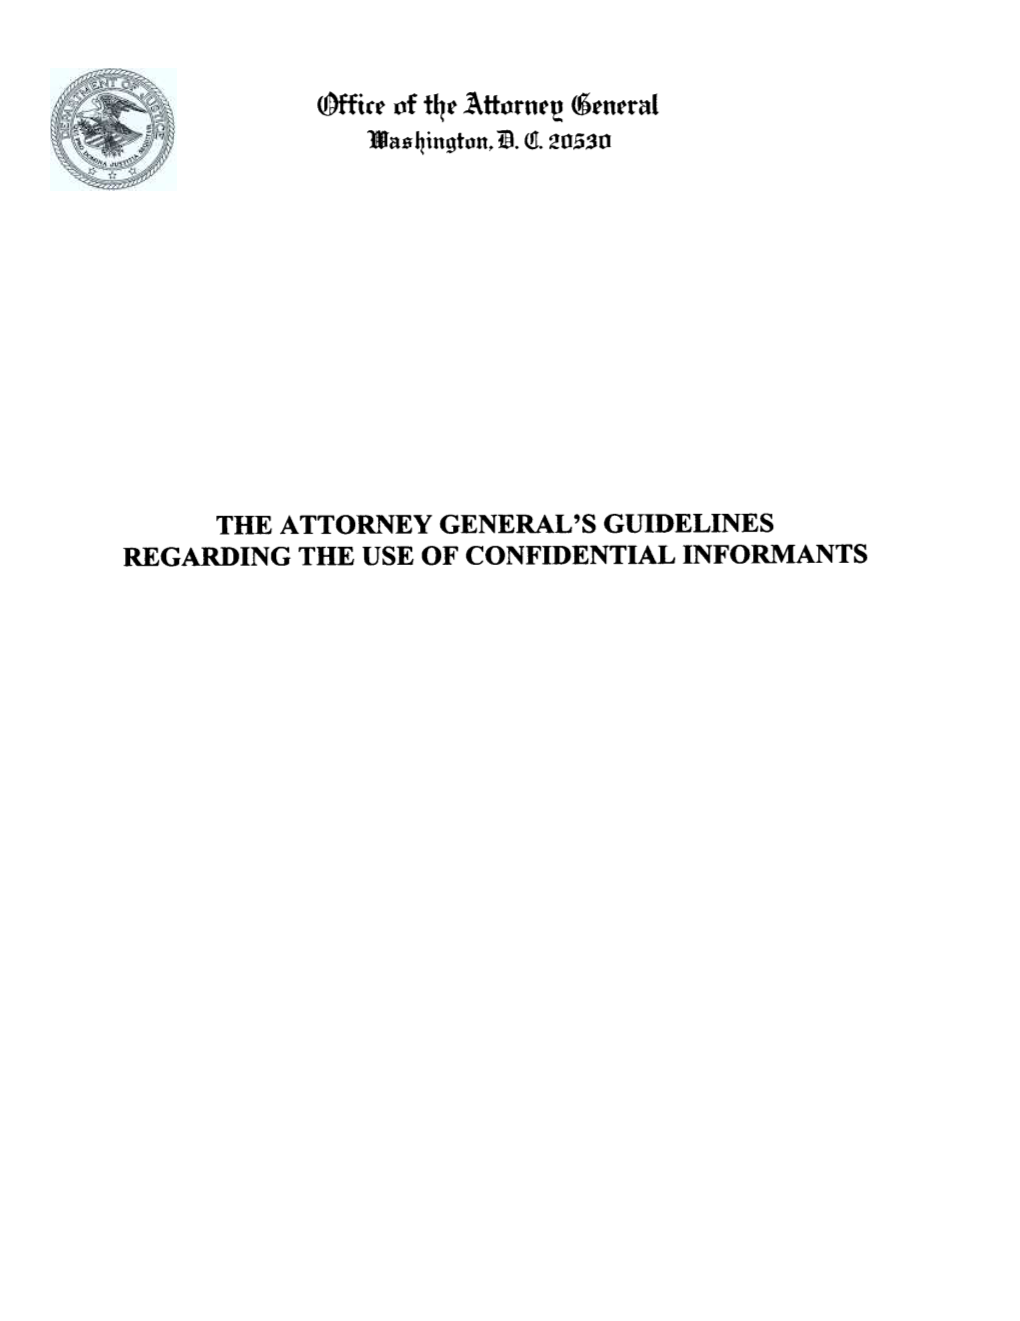 ATTORNEY GENERAL's GUIDELINES REGARDING the USE of CONFIDENTIAL INFORMANTS Preamble